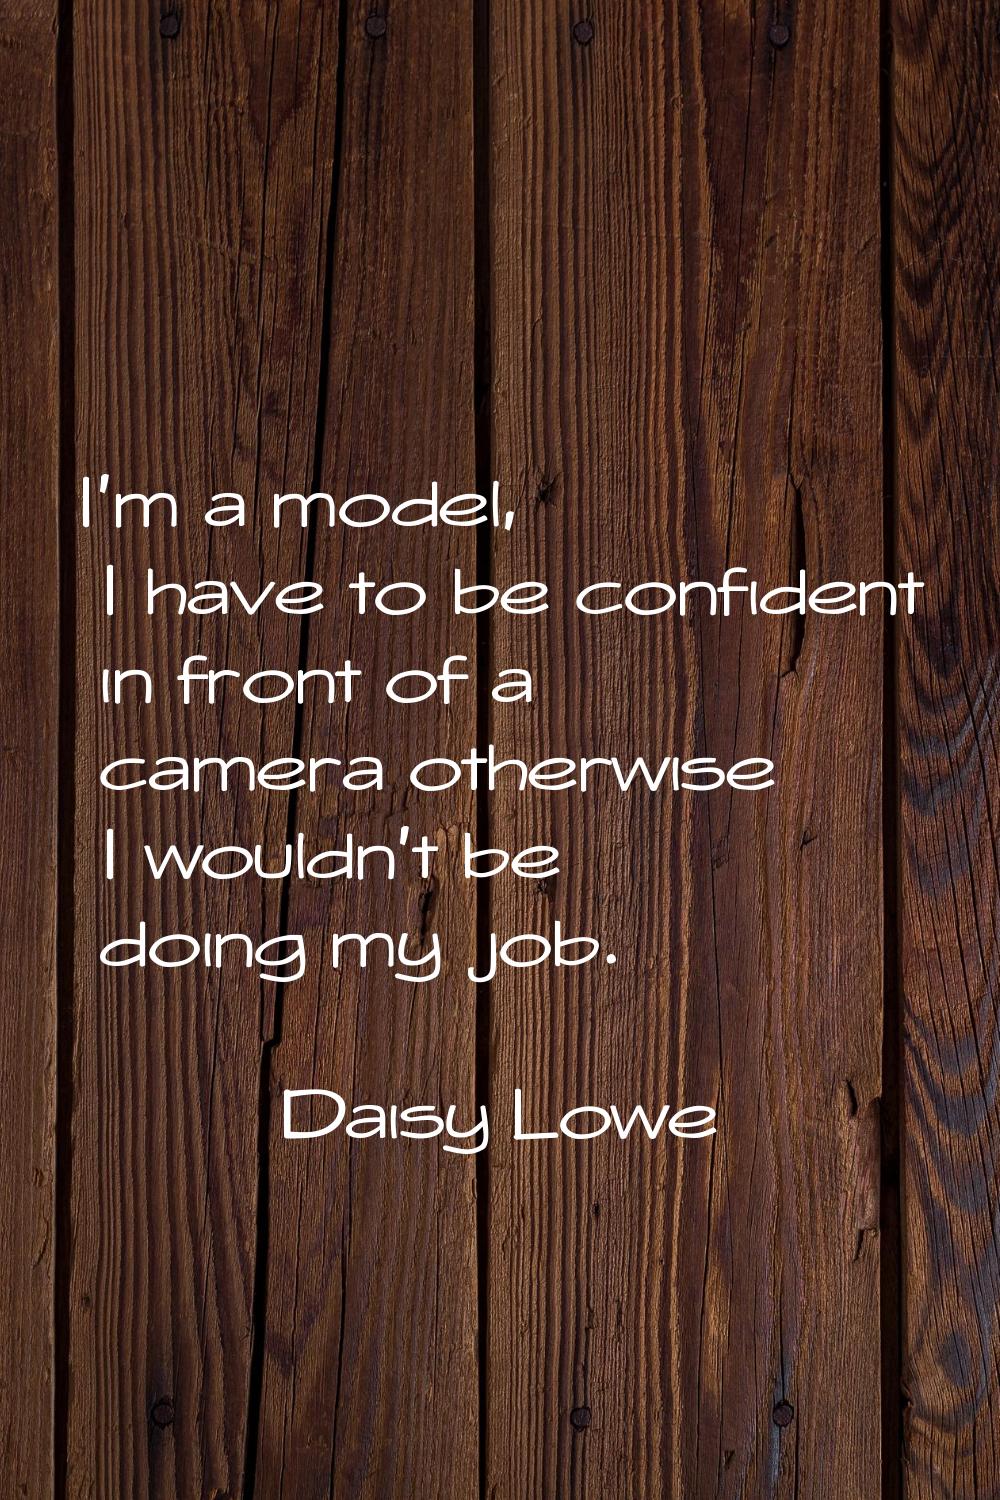 I'm a model, I have to be confident in front of a camera otherwise I wouldn't be doing my job.